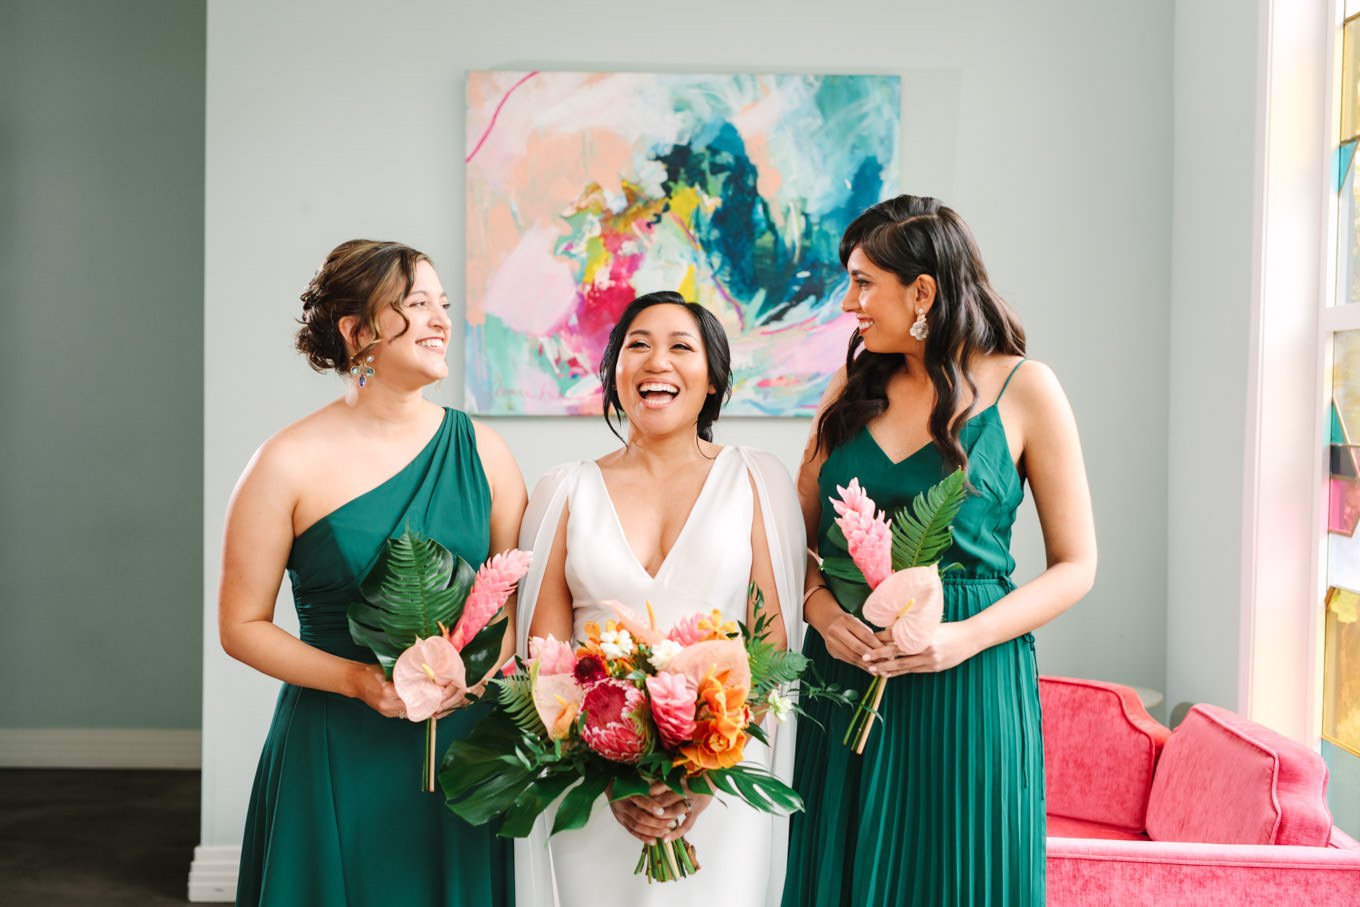 Bride laughing with bridesmaids in green dresses | TV inspired wedding at The Fig House Los Angeles | Published on The Knot | Fresh and colorful photography for fun-loving couples in Southern California | #losangeleswedding #TVwedding #colorfulwedding #theknot   Source: Mary Costa Photography | Los Angeles wedding photographer